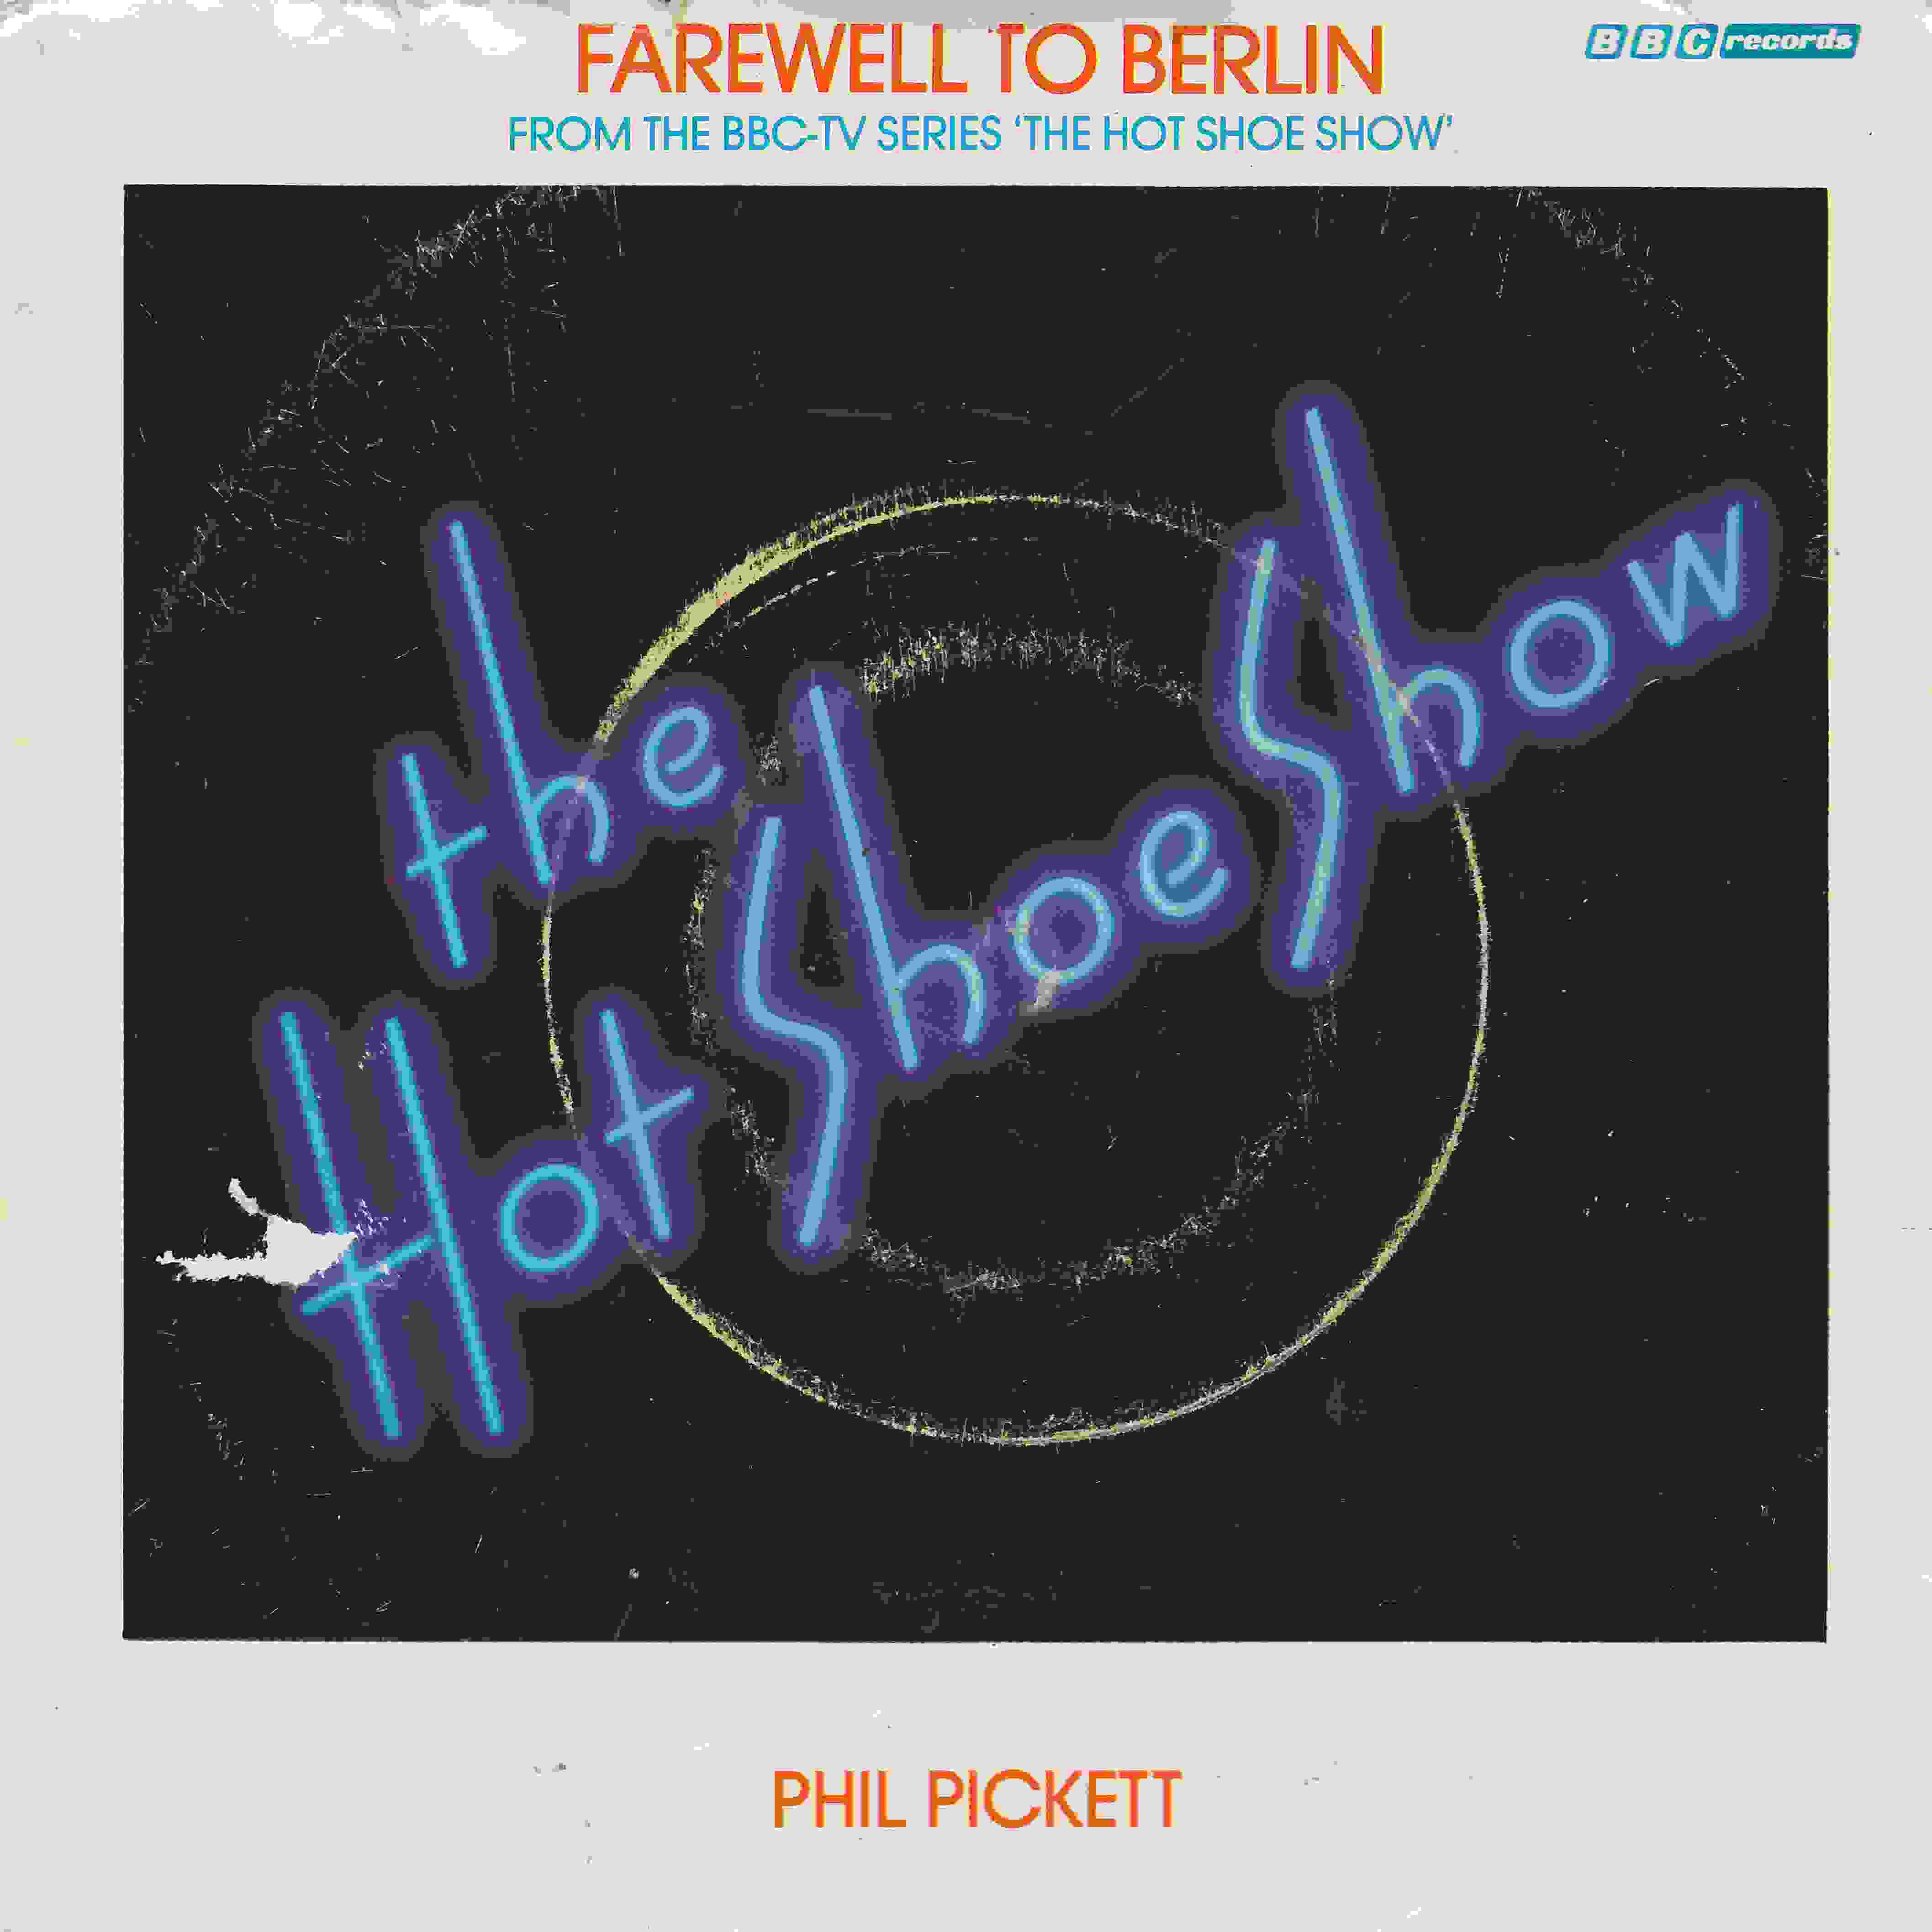 Picture of RESL 133 Farewell to Berlin (The hot shoe show) by artist Phil Pickett from the BBC records and Tapes library